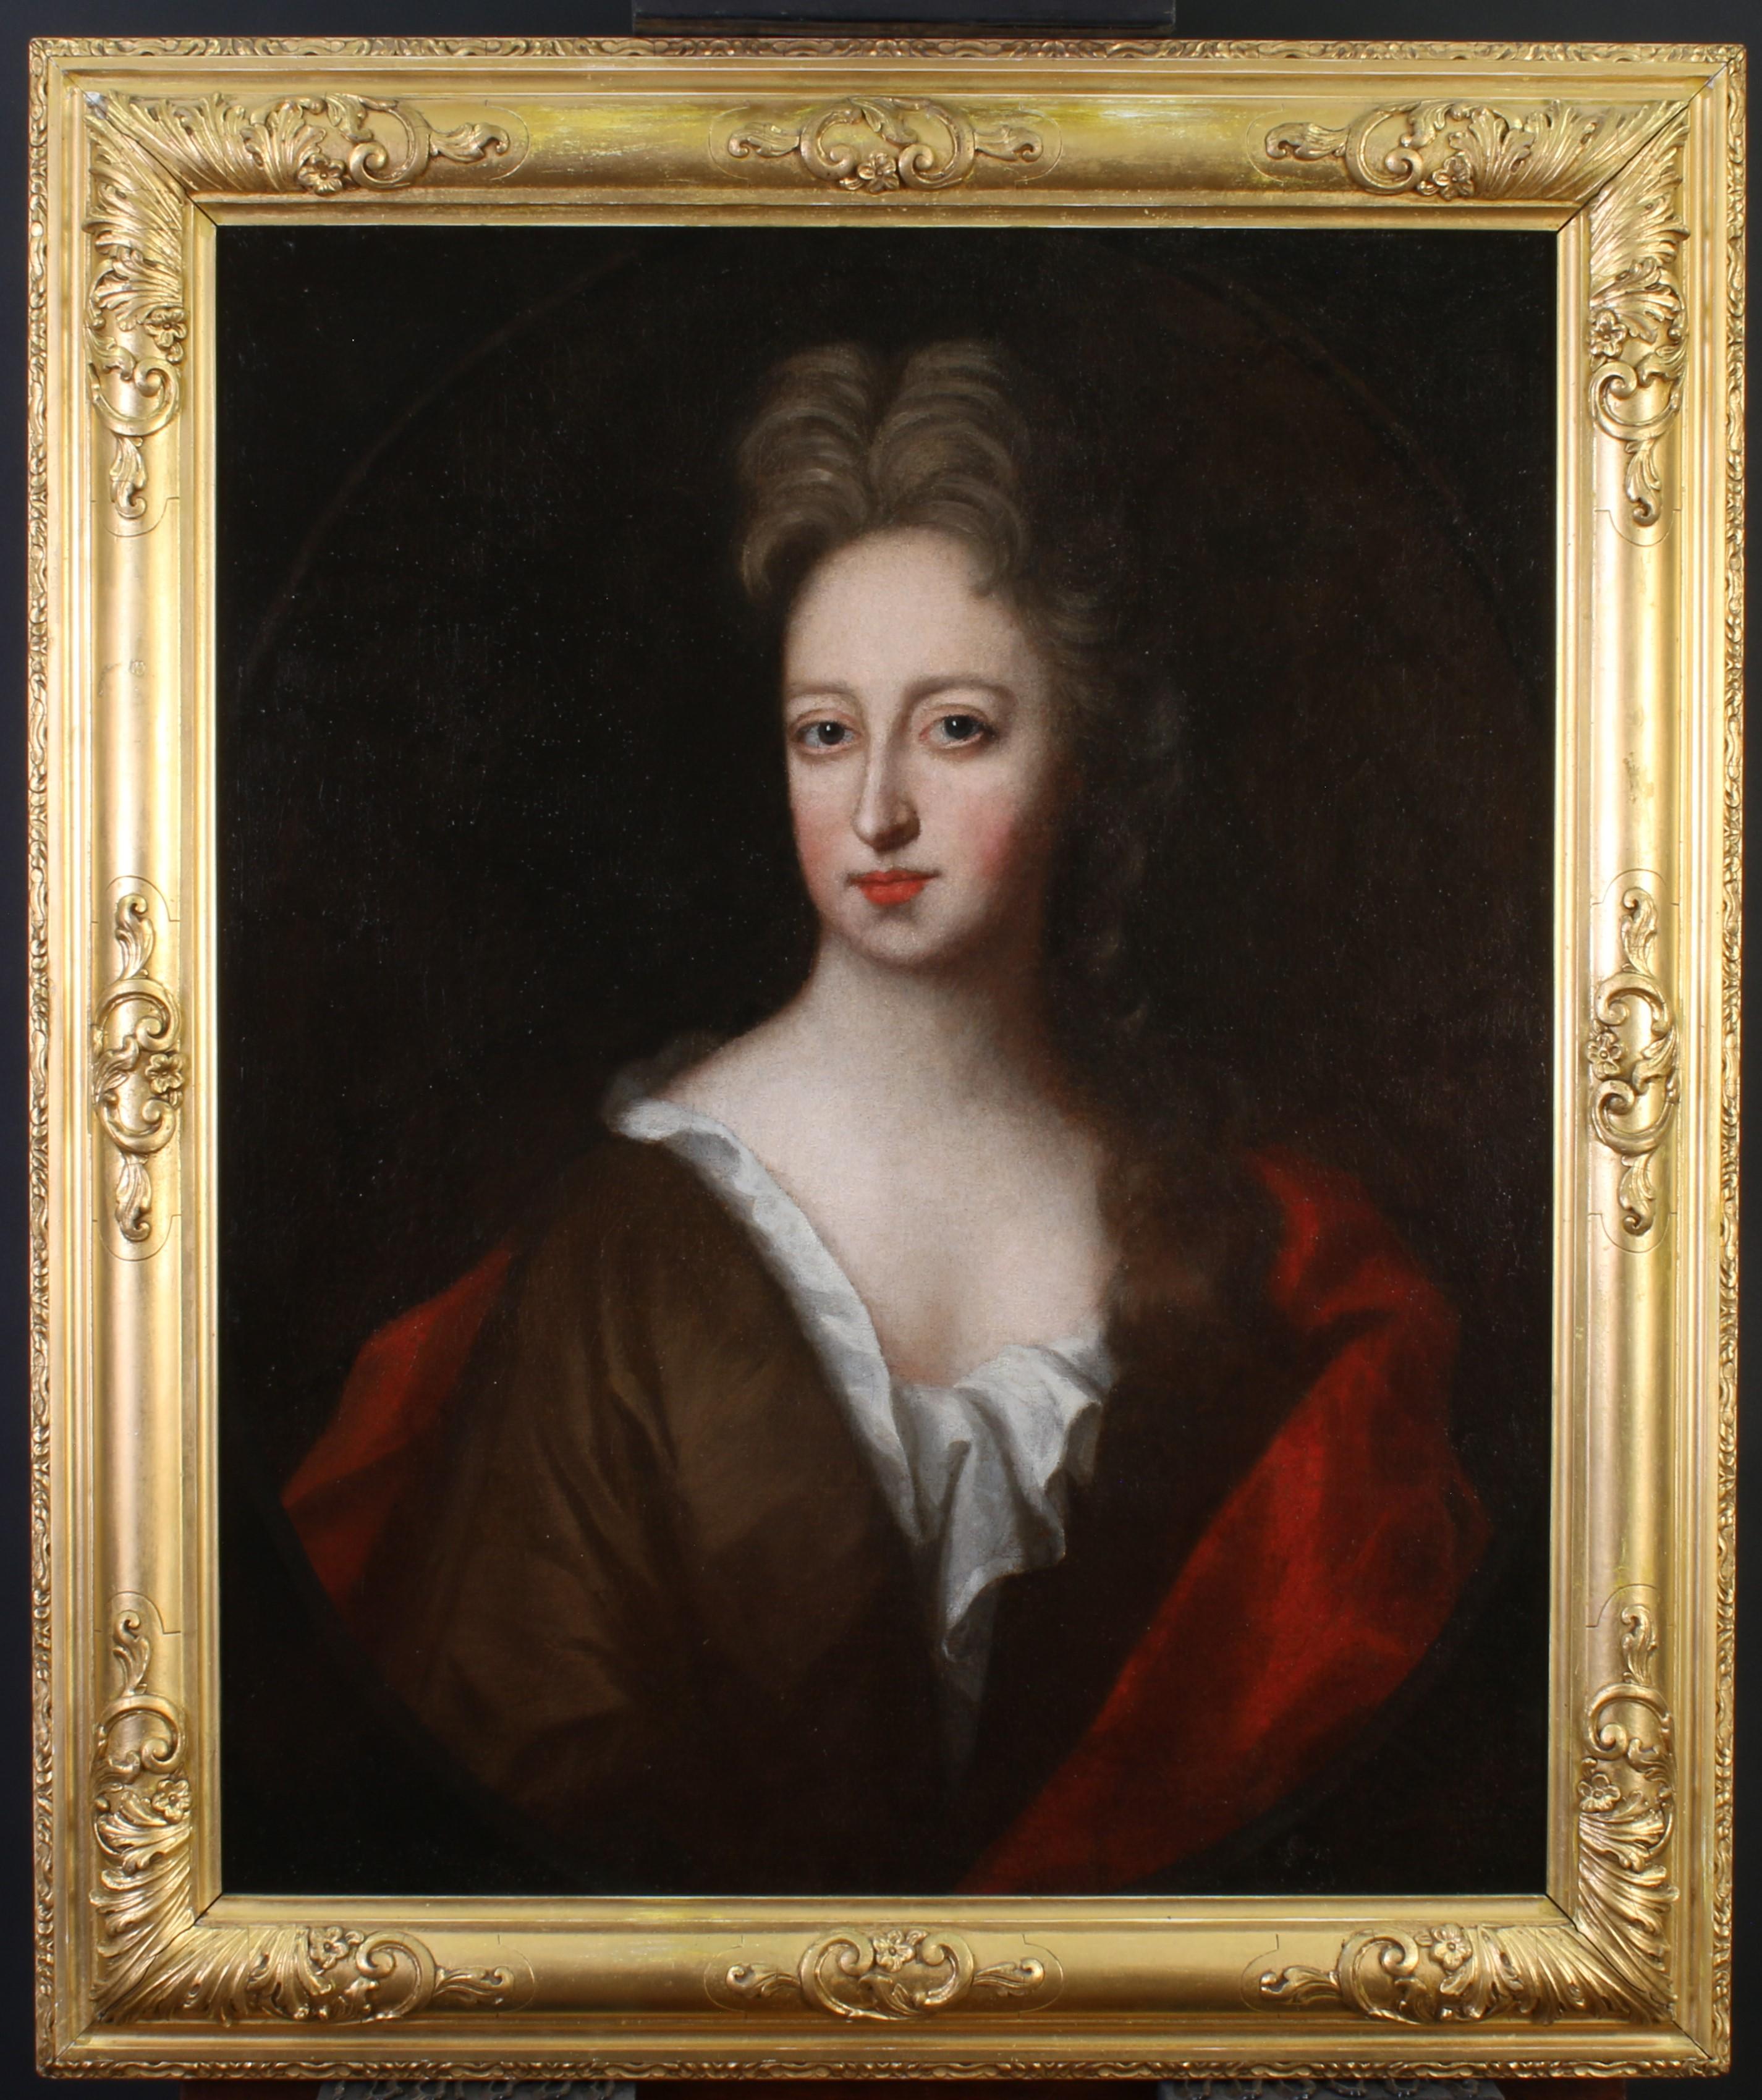 Sir Godfrey Kneller Portrait Painting - Portrait of the Countess of Dysart